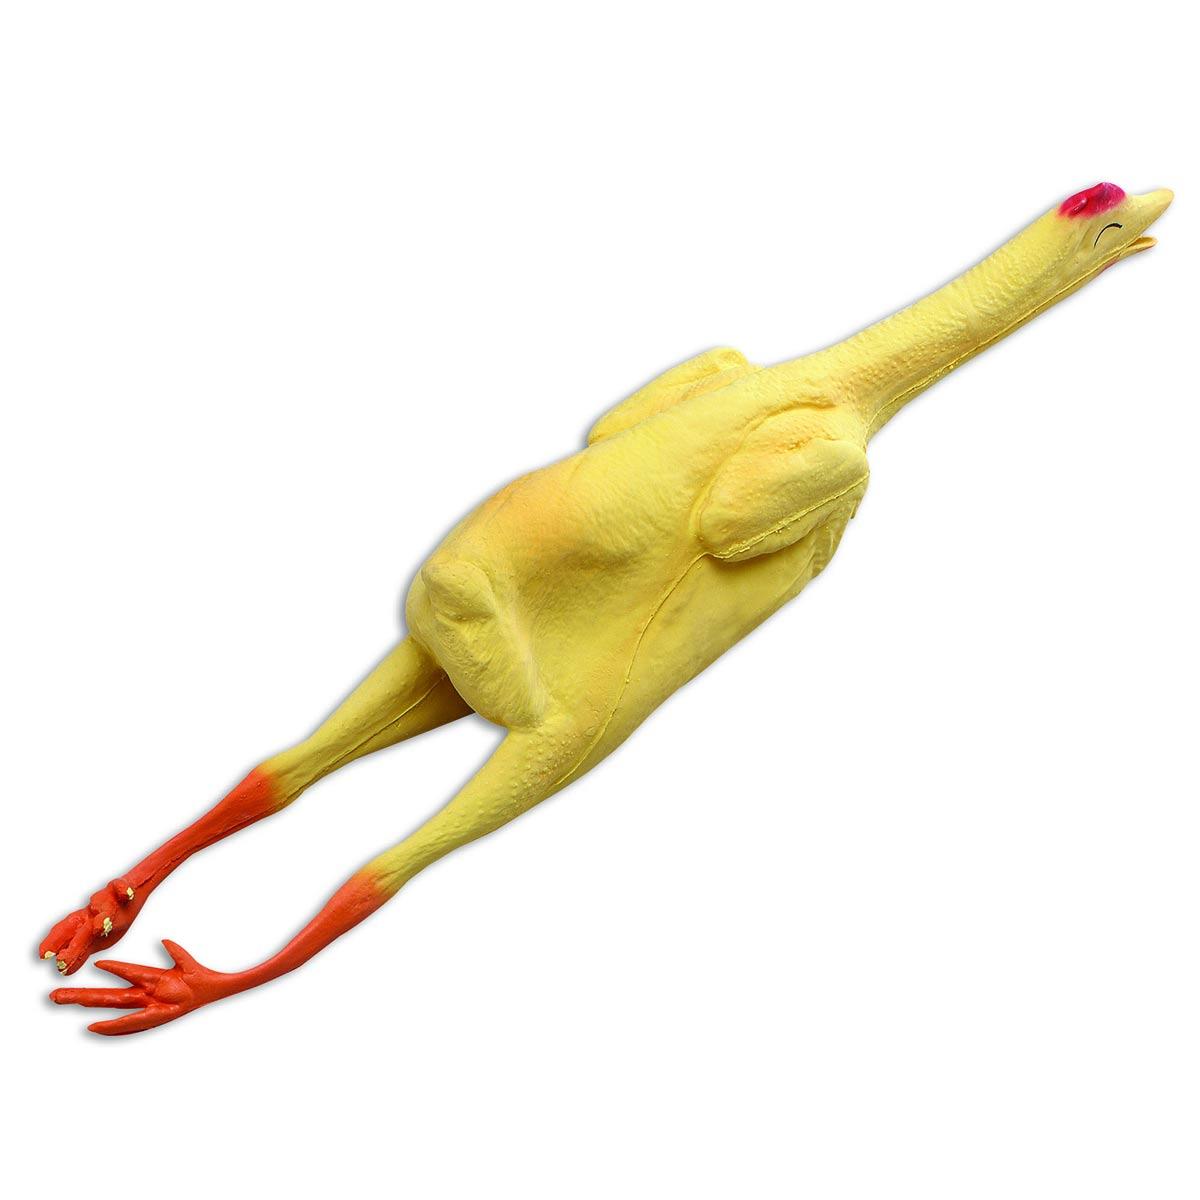 Rubber Chicken 23" plucked by Bristol Novelties GJ036 available here at Karnival Costumes online party shop